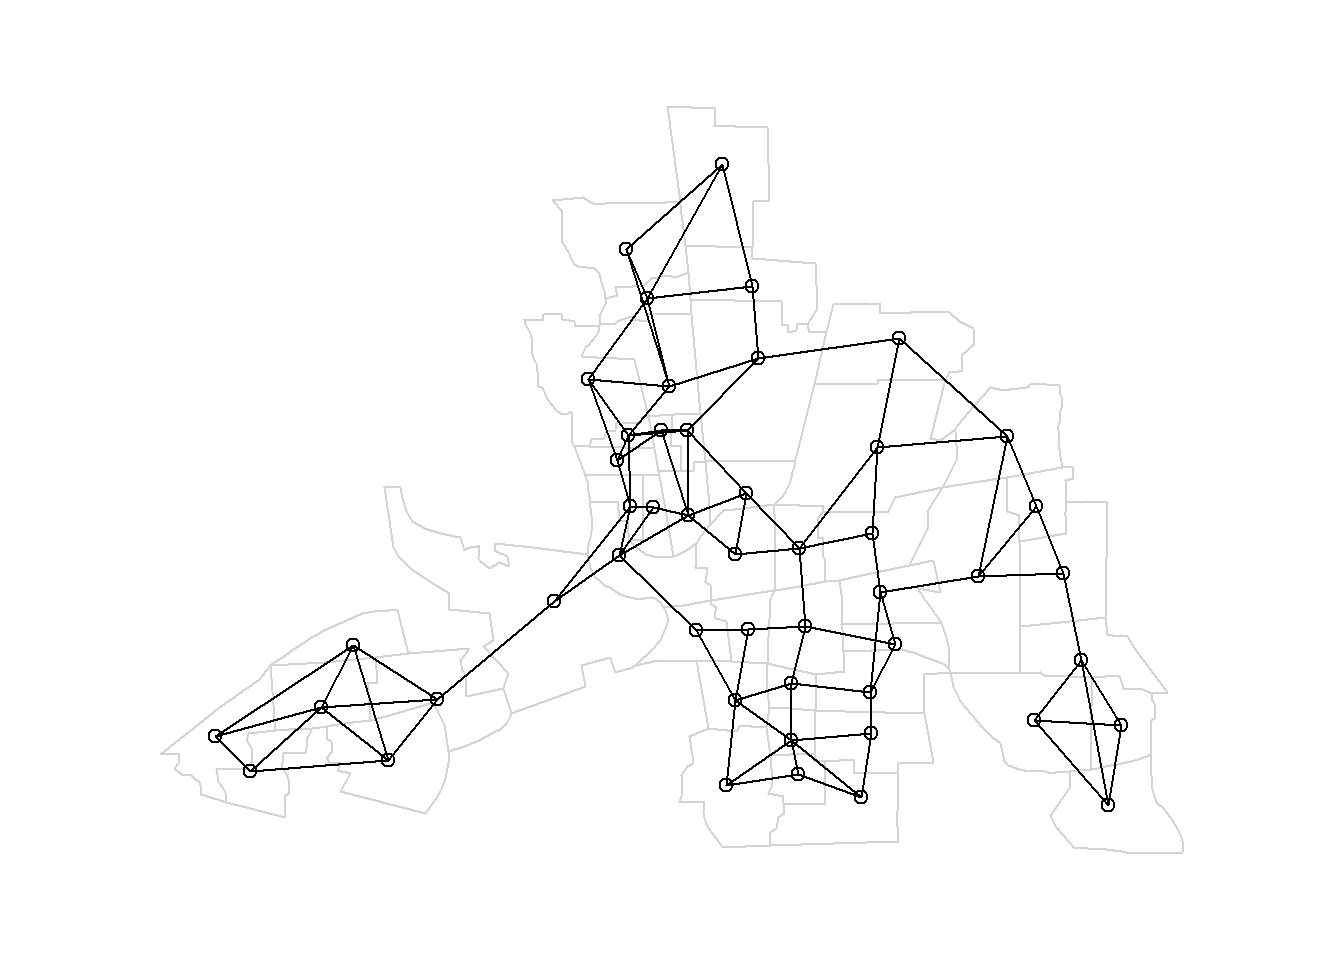 Left: Neighbors based on 3 nearest neighbors. Area of interest is represented in black and its neighbors in gray. Right: Map of neighbors based on 3 nearest neighbors.